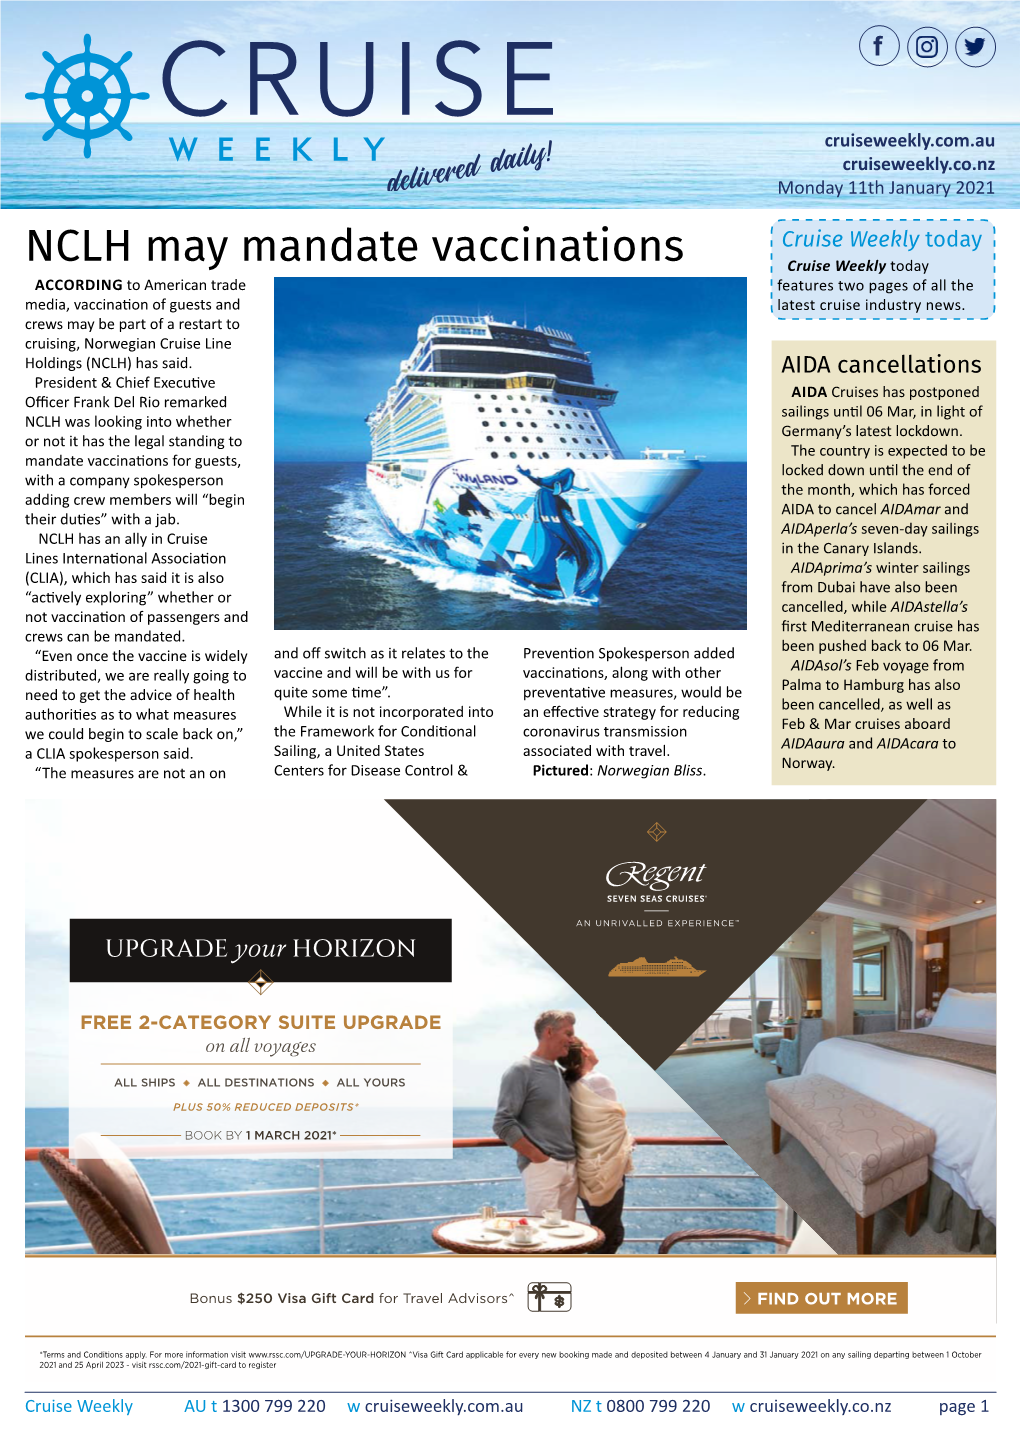 NCLH May Mandate Vaccinations